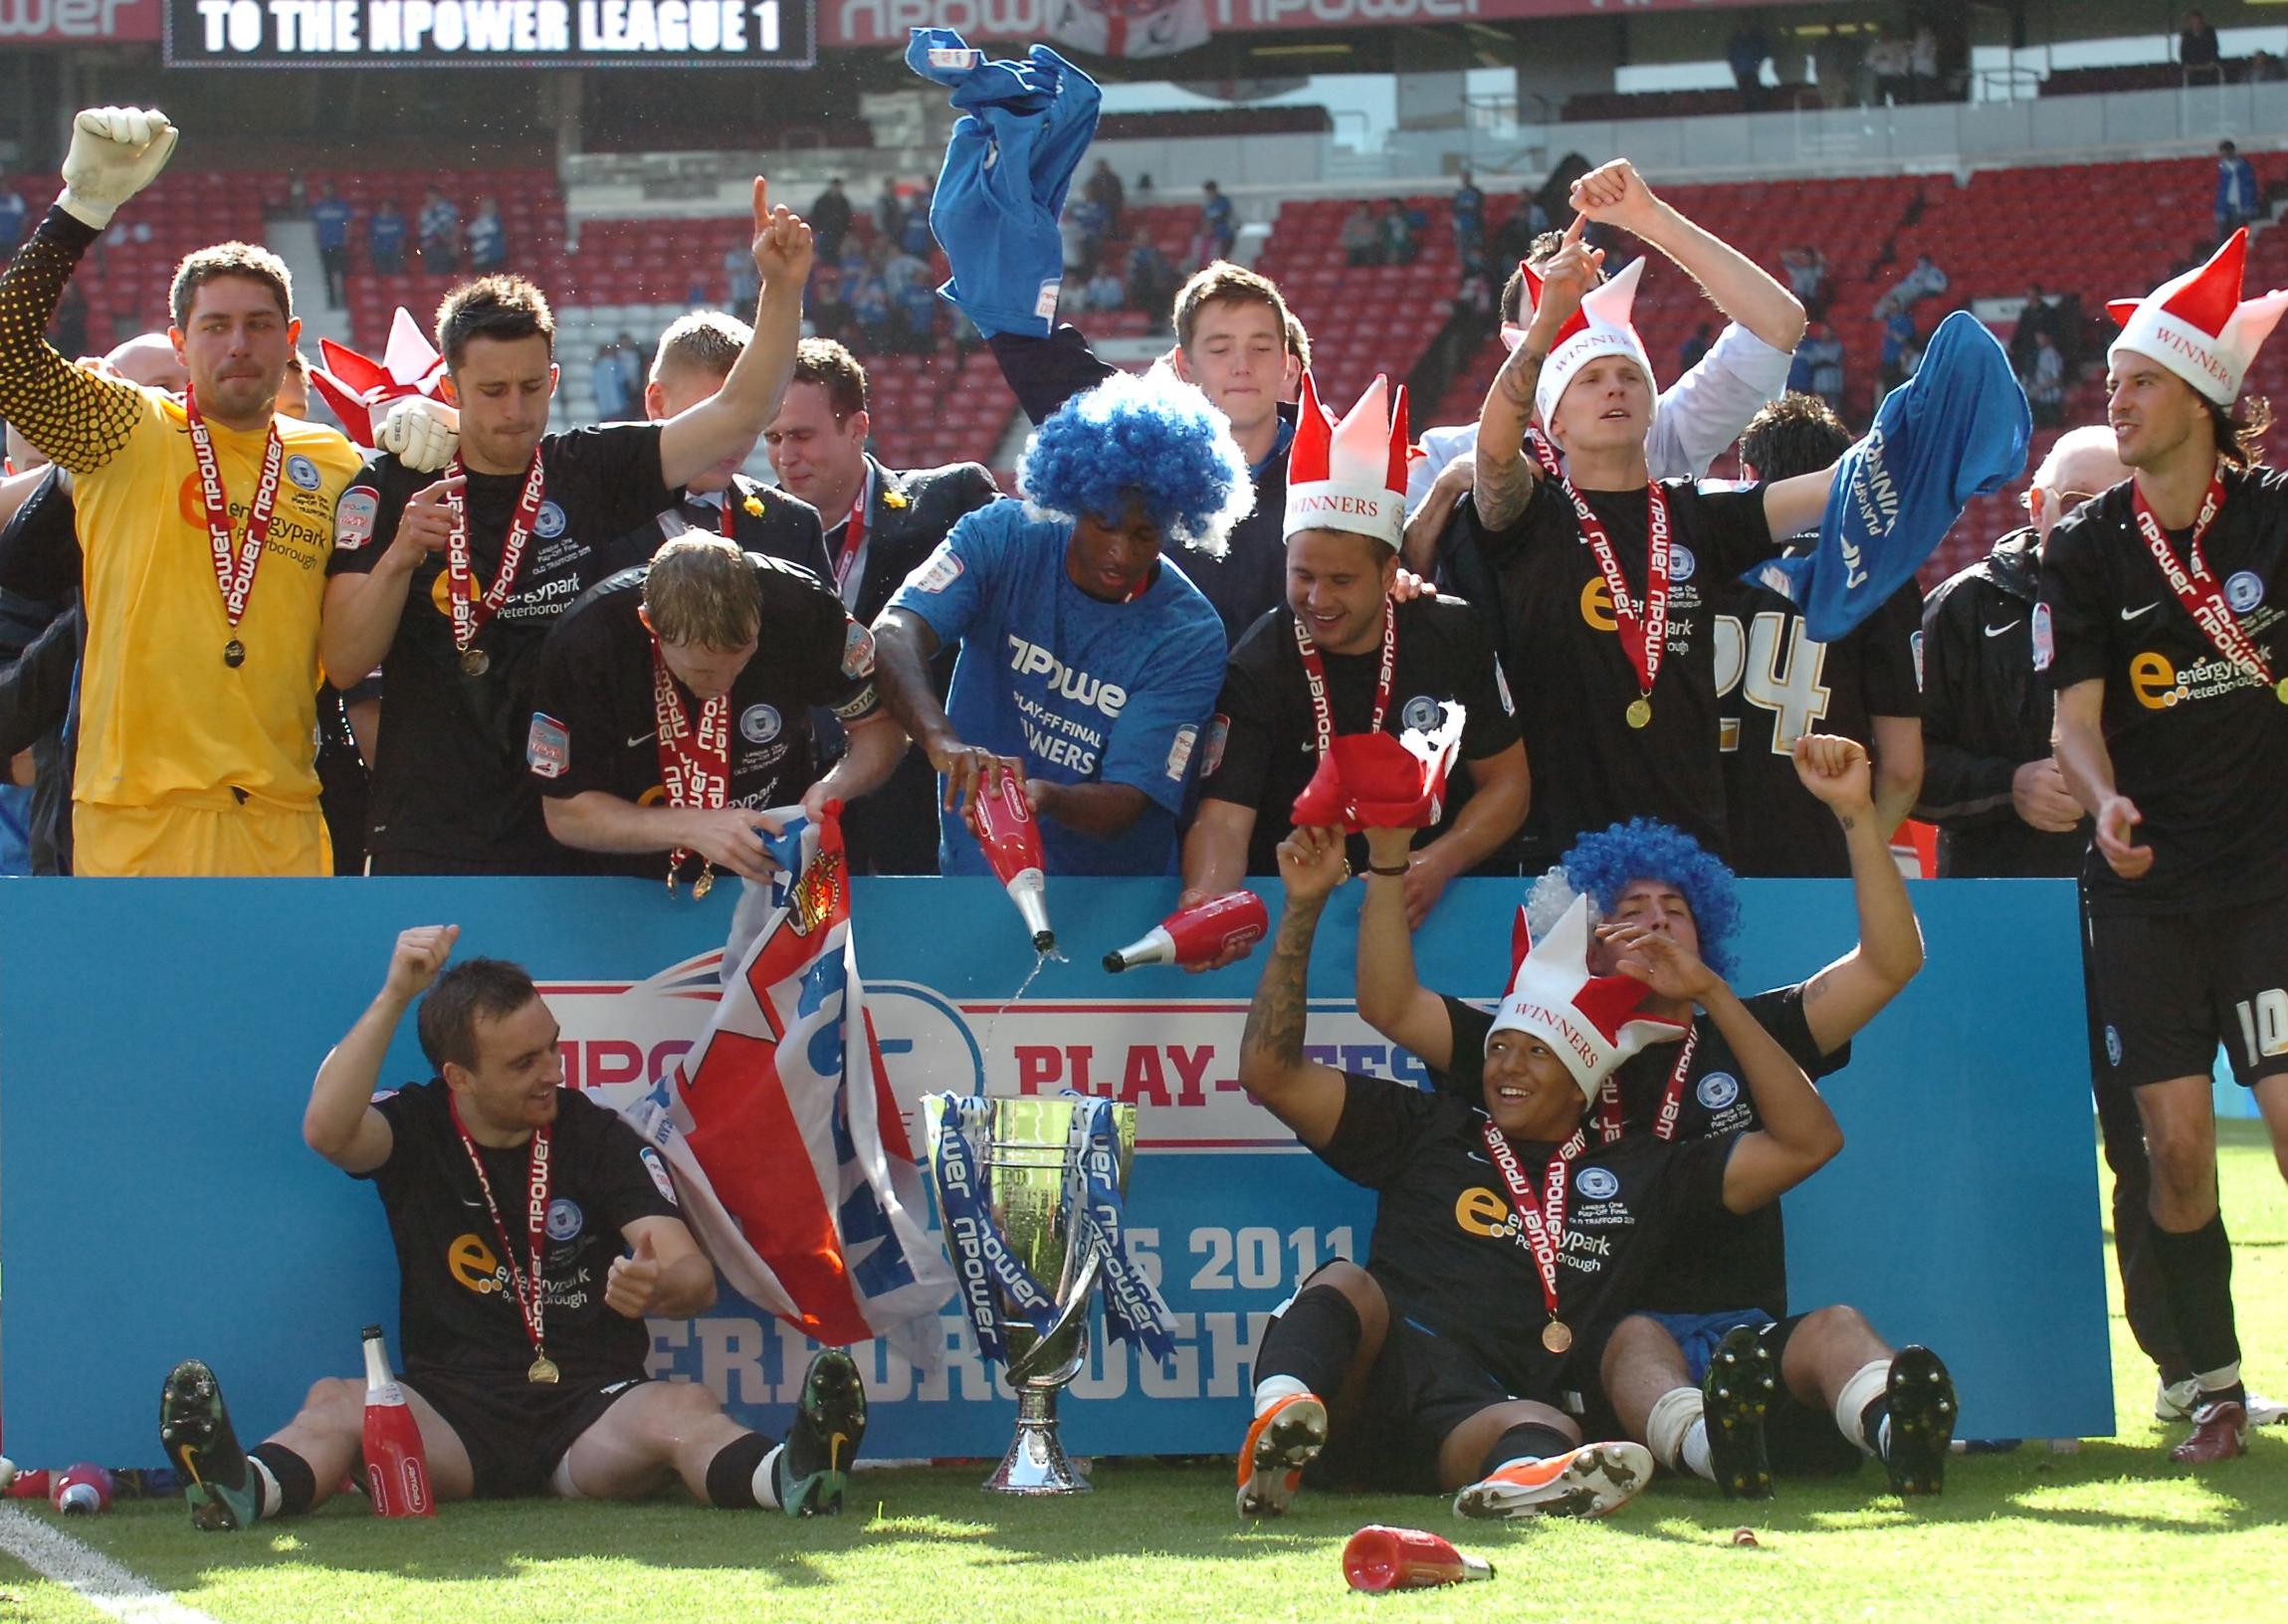 Celebrations for Posh after winning the 2011 League One play-off final at Old Trafford.